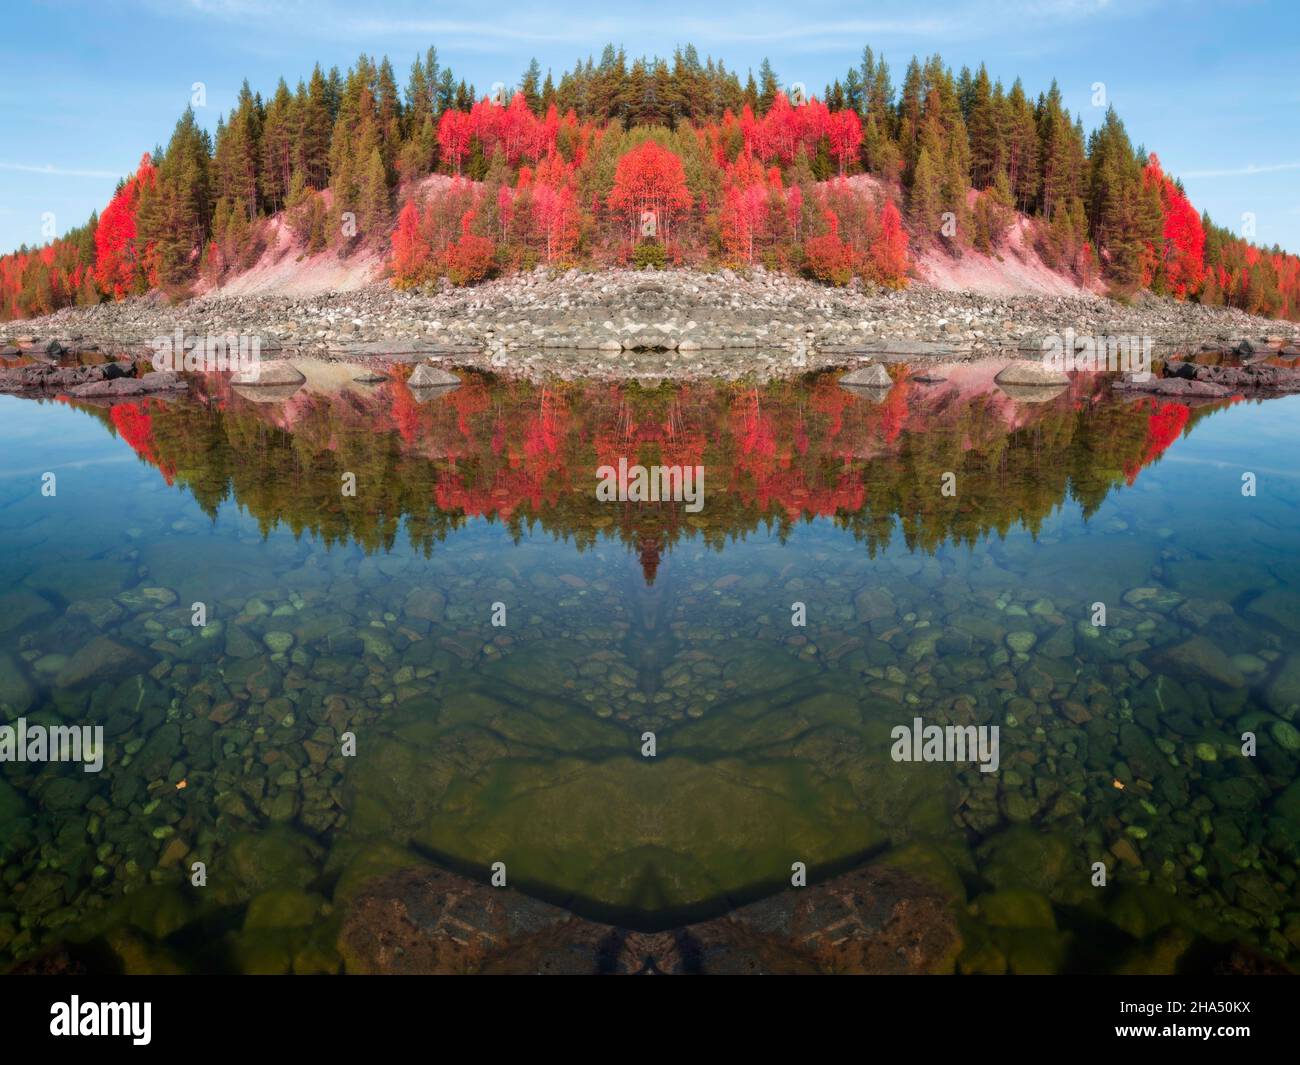 moss on rocks under water in a autumn landscape with trees,rocks in red tones a mirrored photo Stock Photo